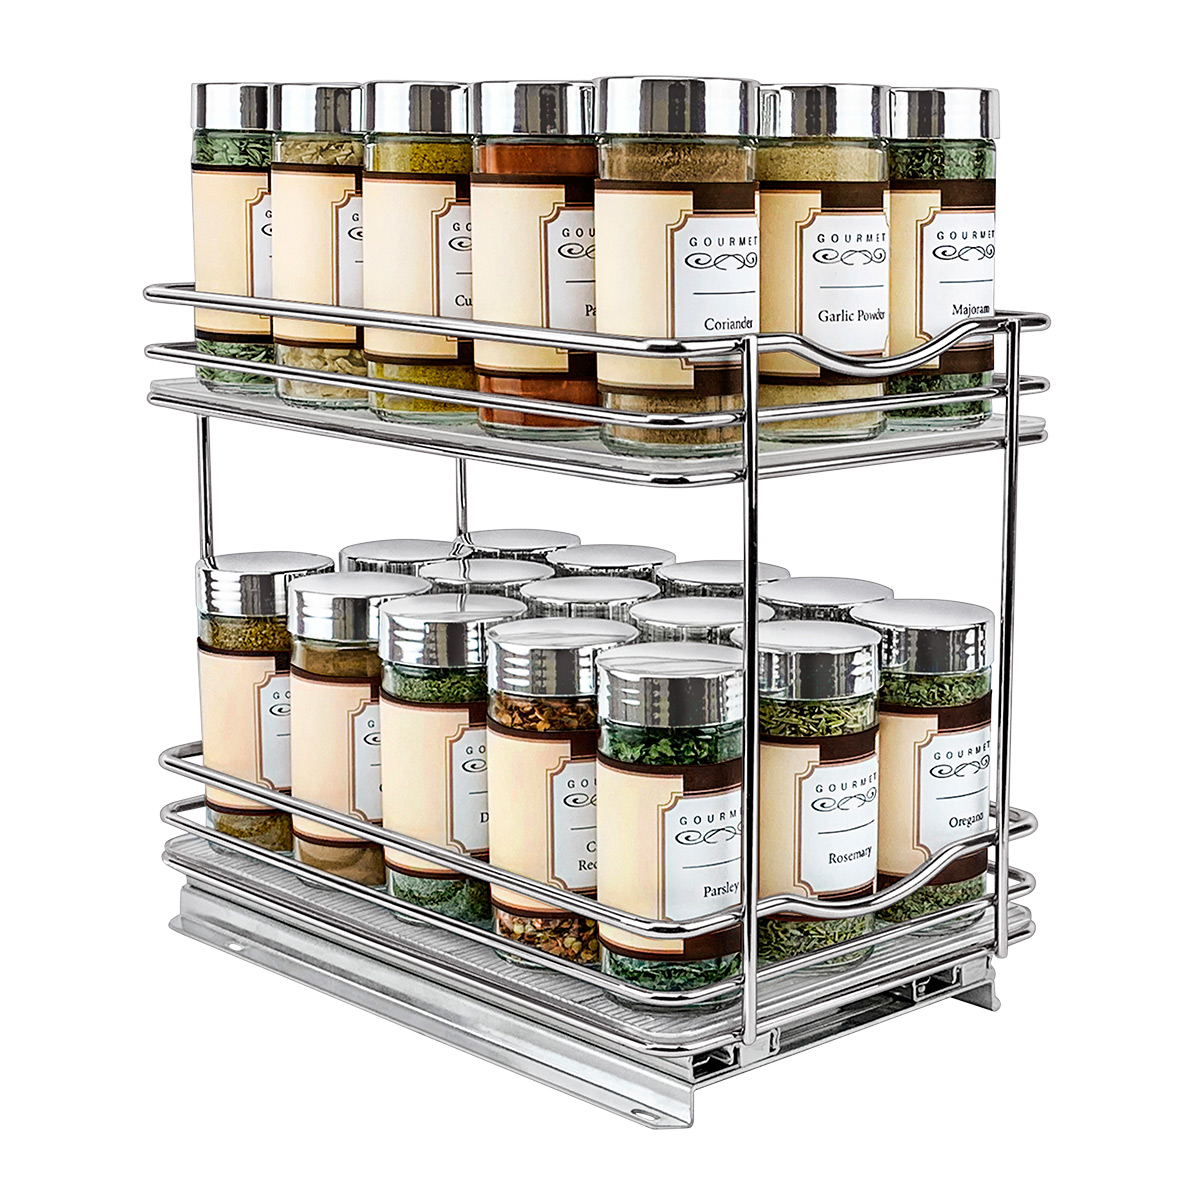 https://www.containerstore.com/catalogimages/364492/10077219-Lynk-Double-Spice-Wide-Chro.jpg